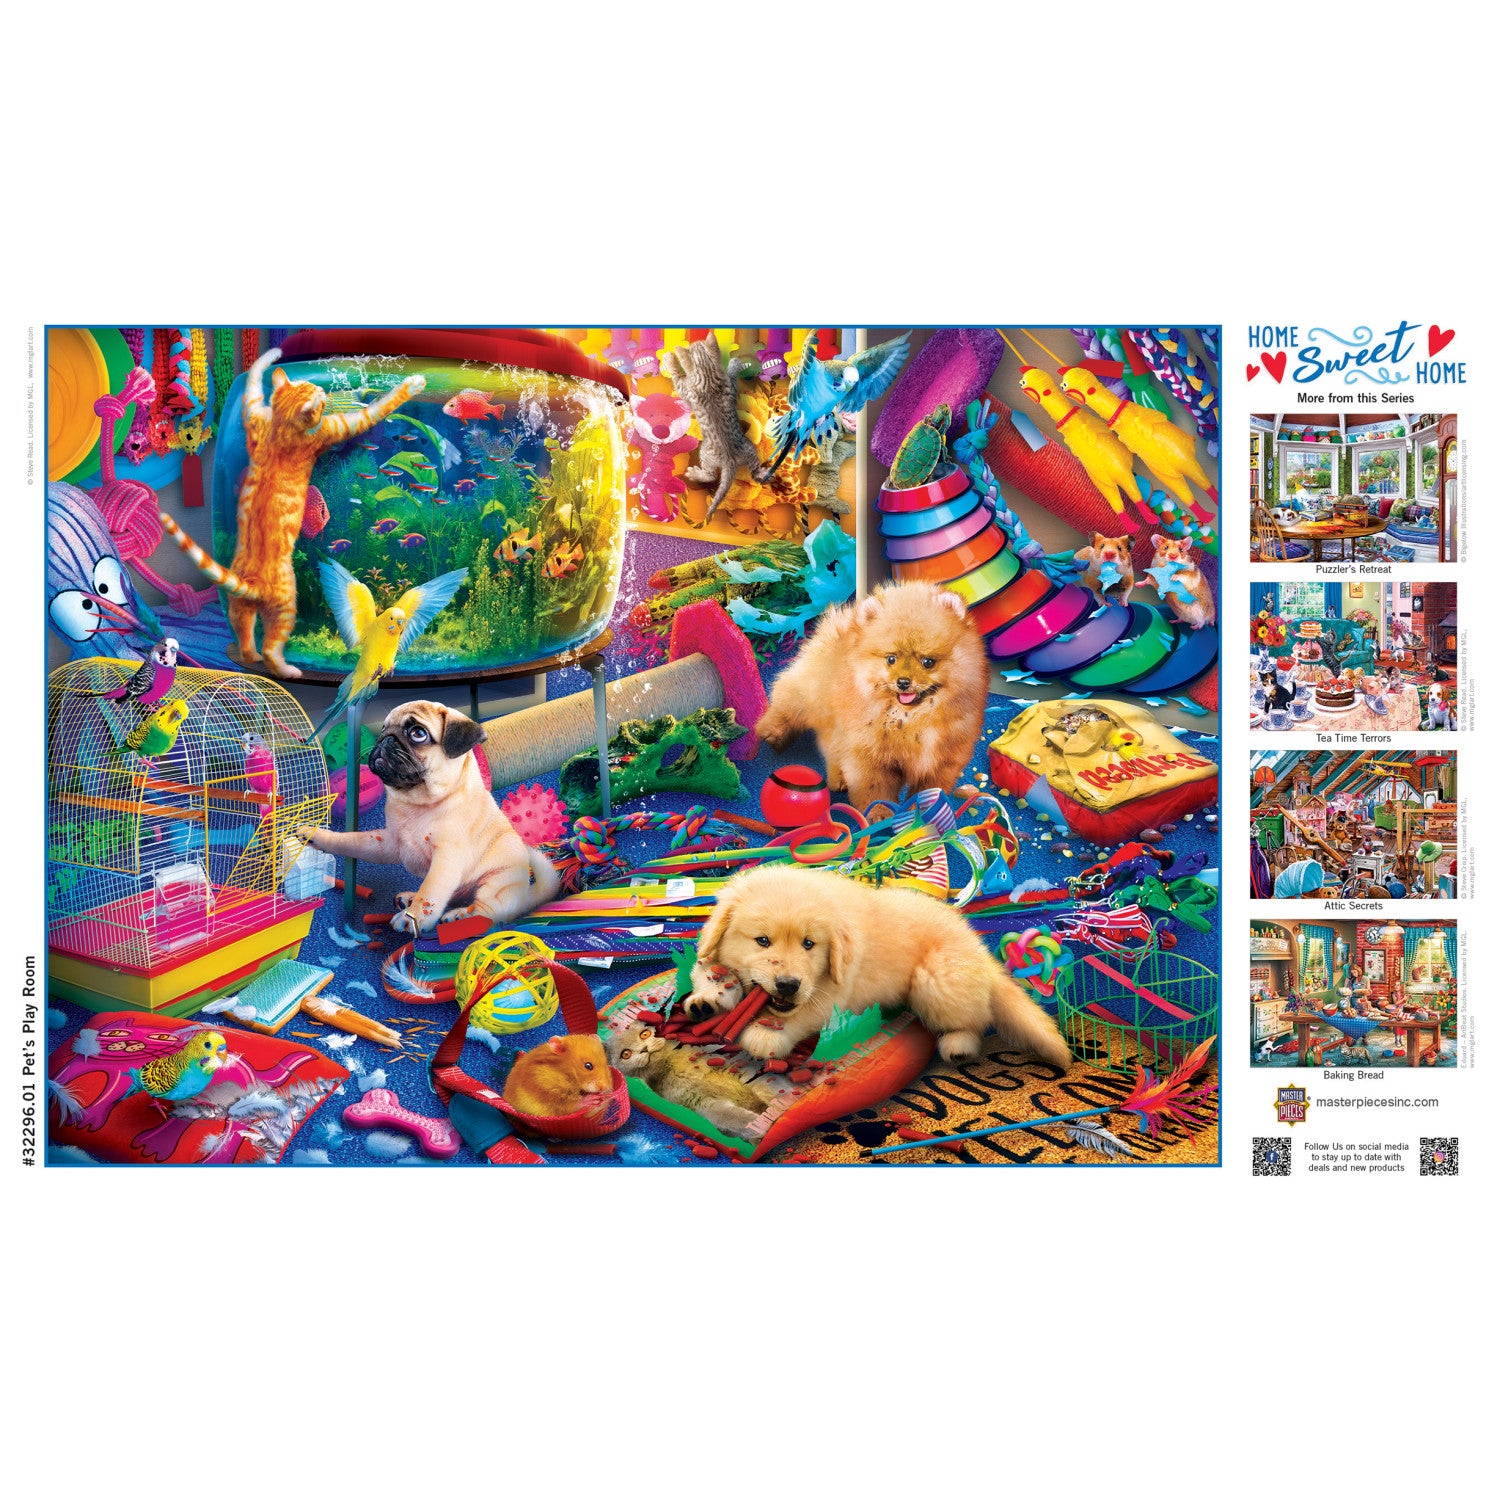 Home Sweet Home - Pet's Play Room 500 Piece Jigsaw Puzzle